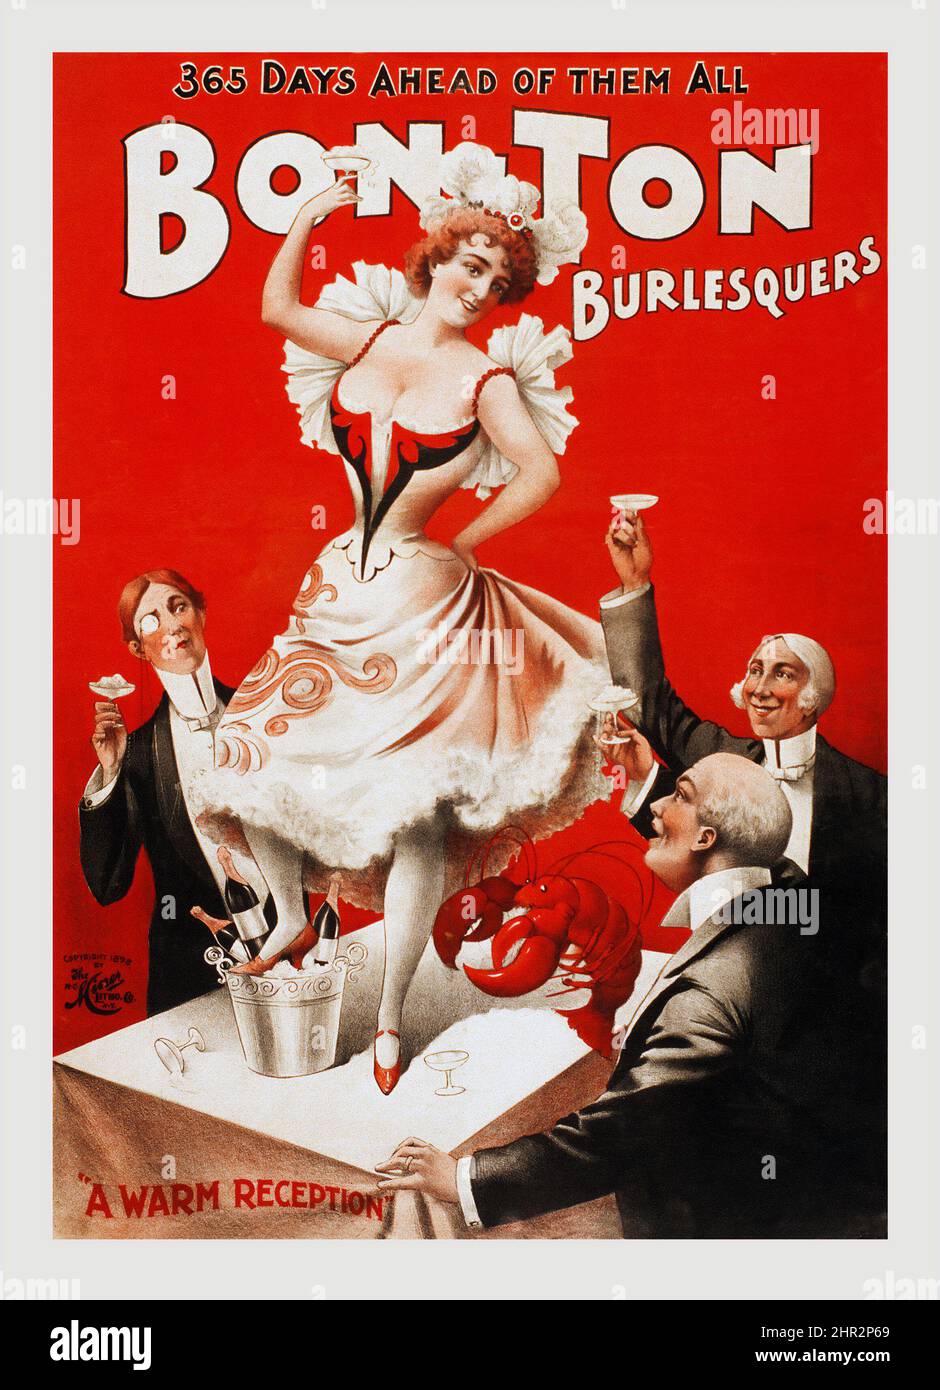 Bon Ton Burlesquers 365 days ahead of them all - A warm reception.. N.Y. H.C. Miner Litho. Co., c 1898. Vintage theatrical poster. Stock Photo